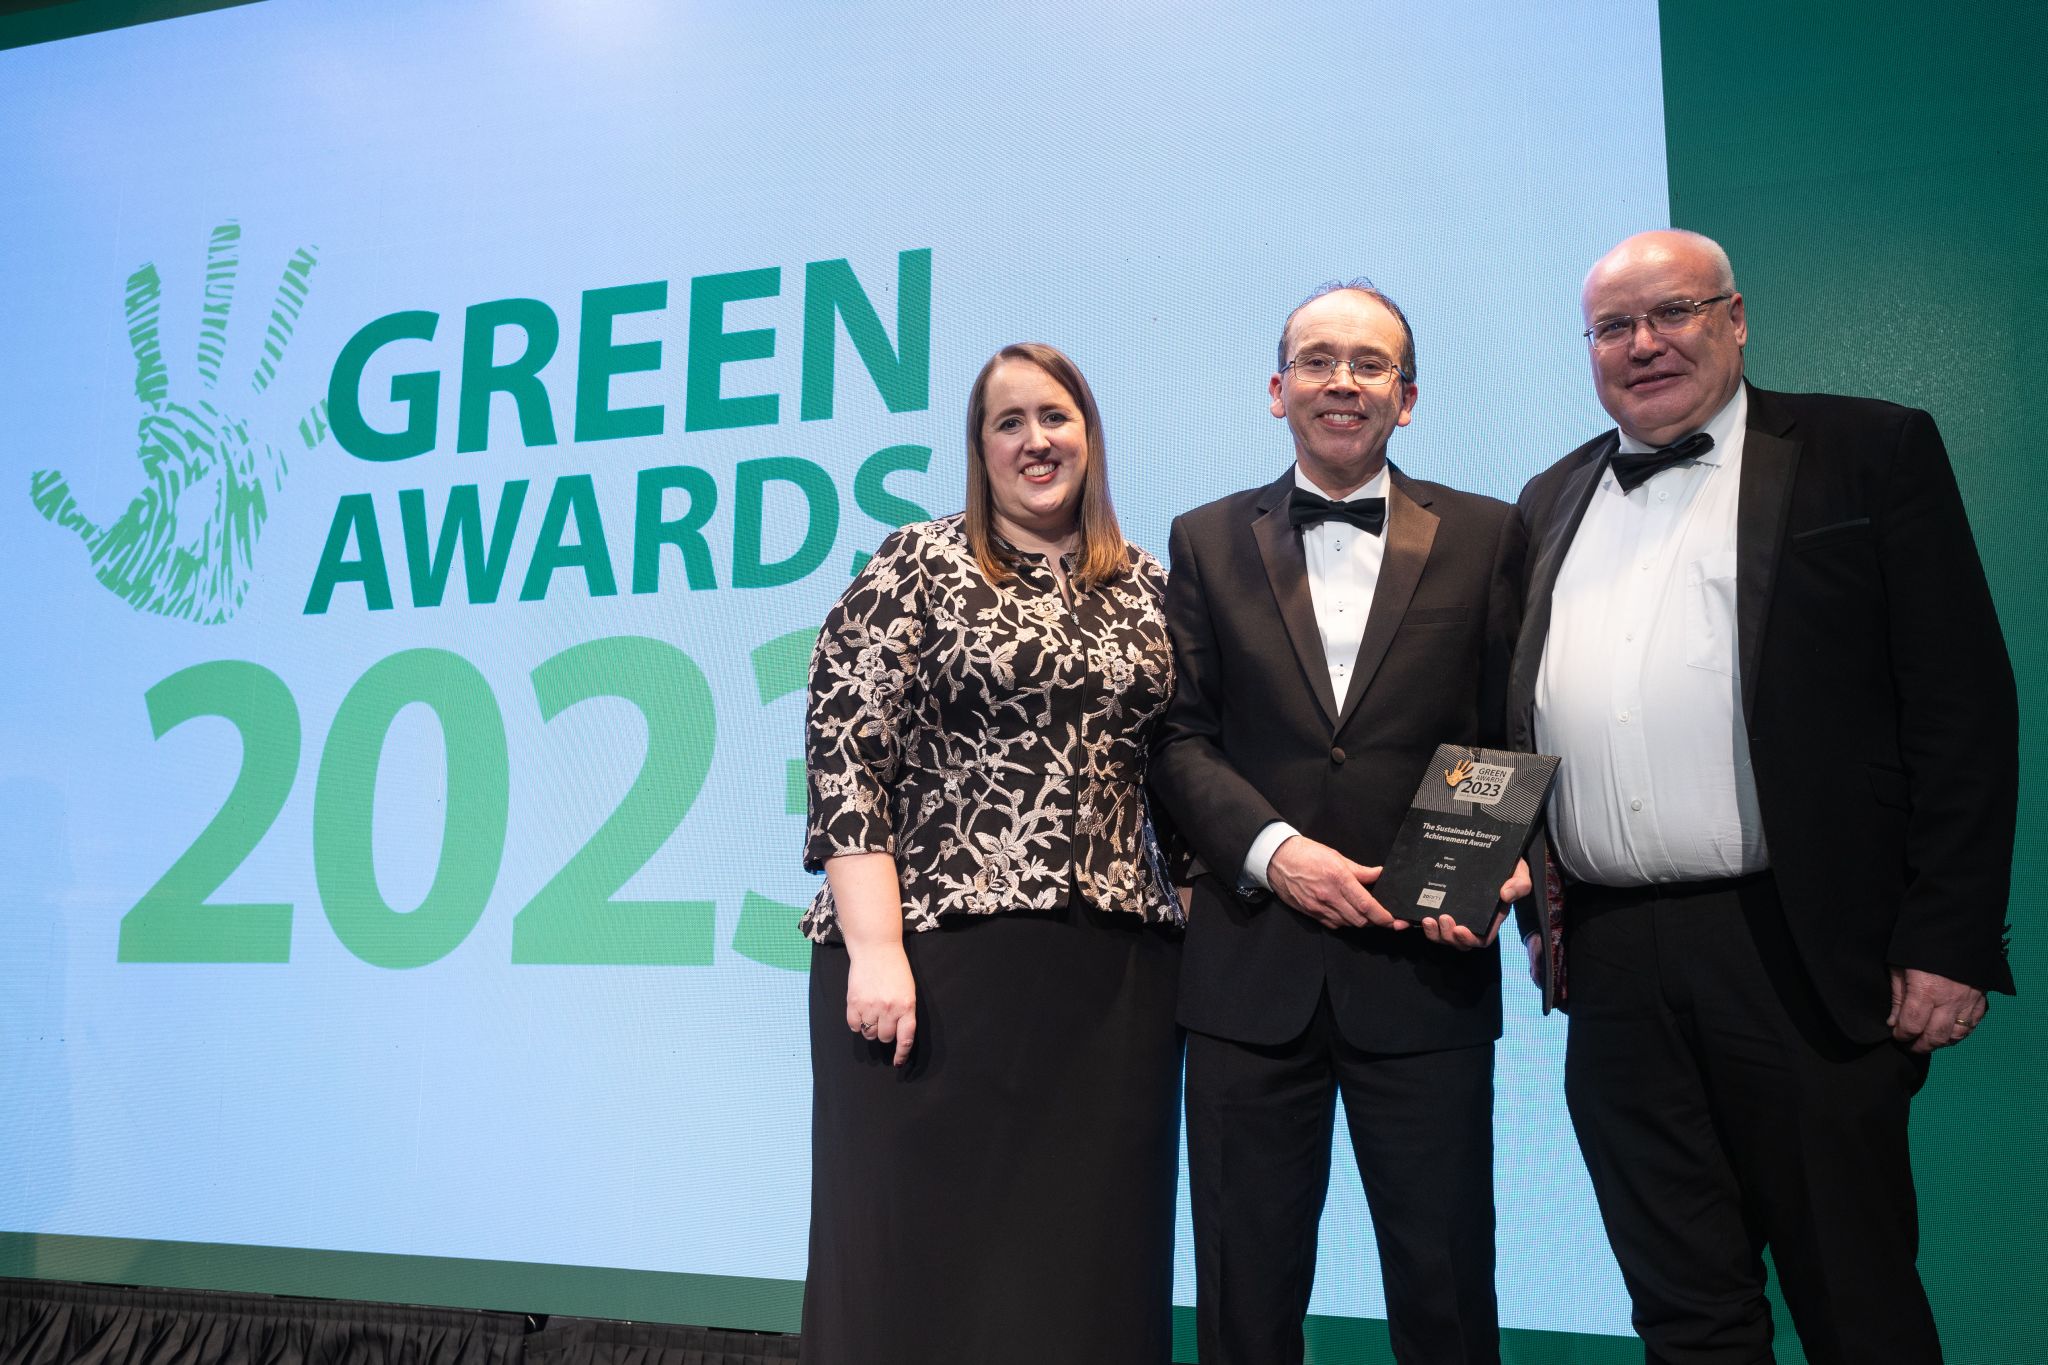 Image from Green Awards 2023 of award being presented